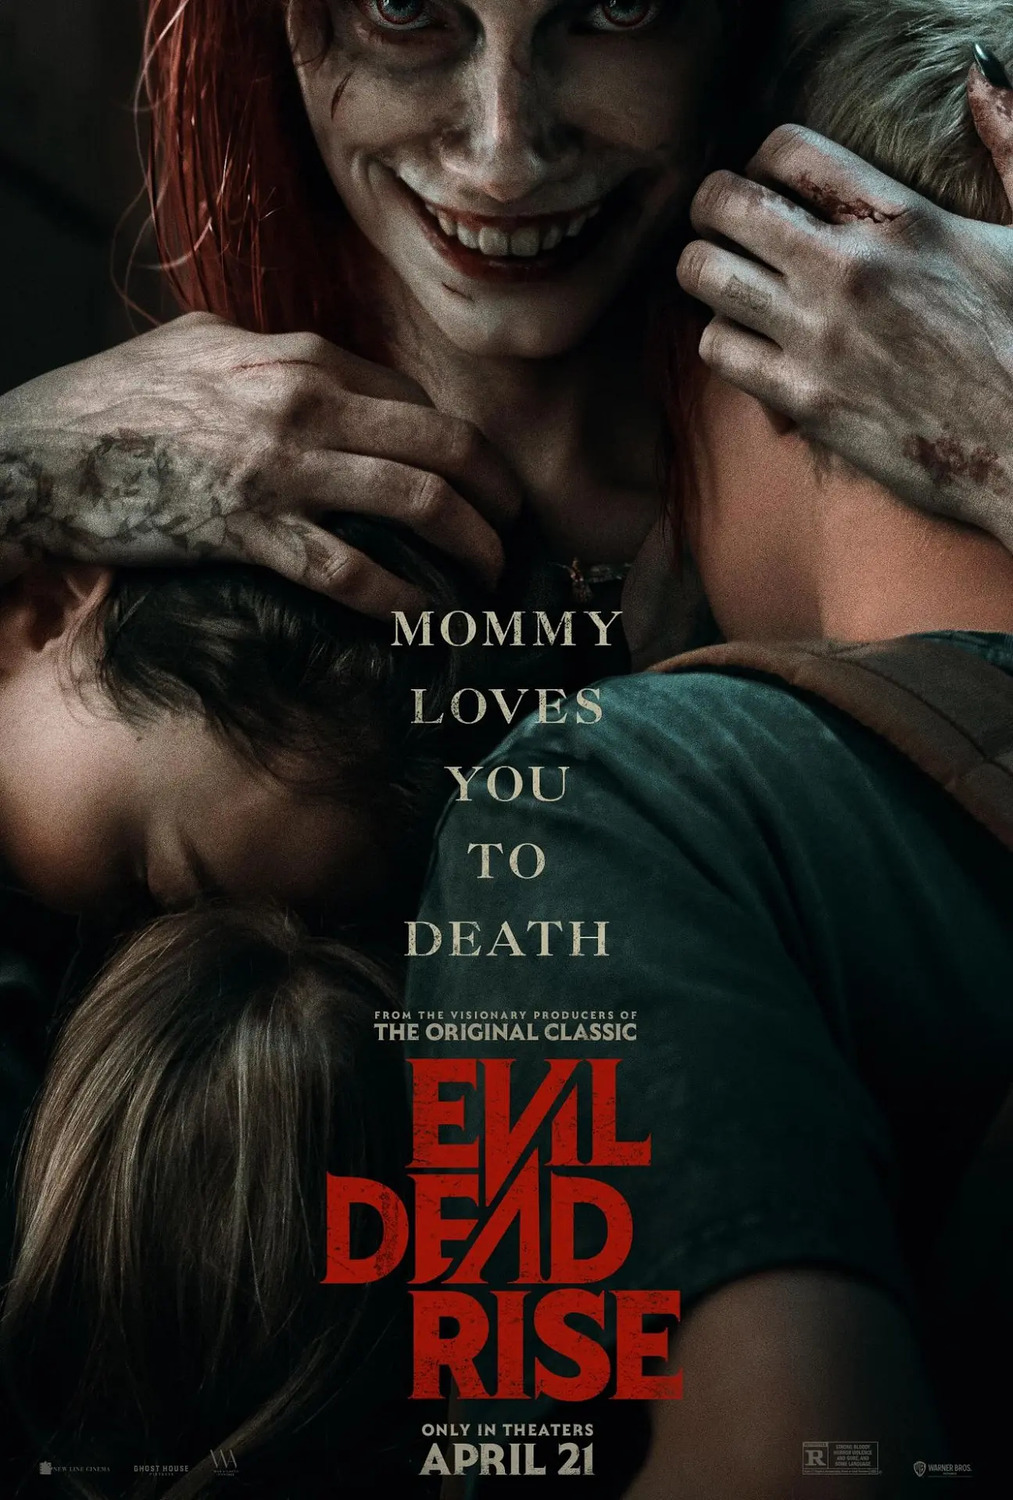 Hollywood Erotic Movie Download - EVIL DEAD RISE - Movieguide | Movie Reviews for Families